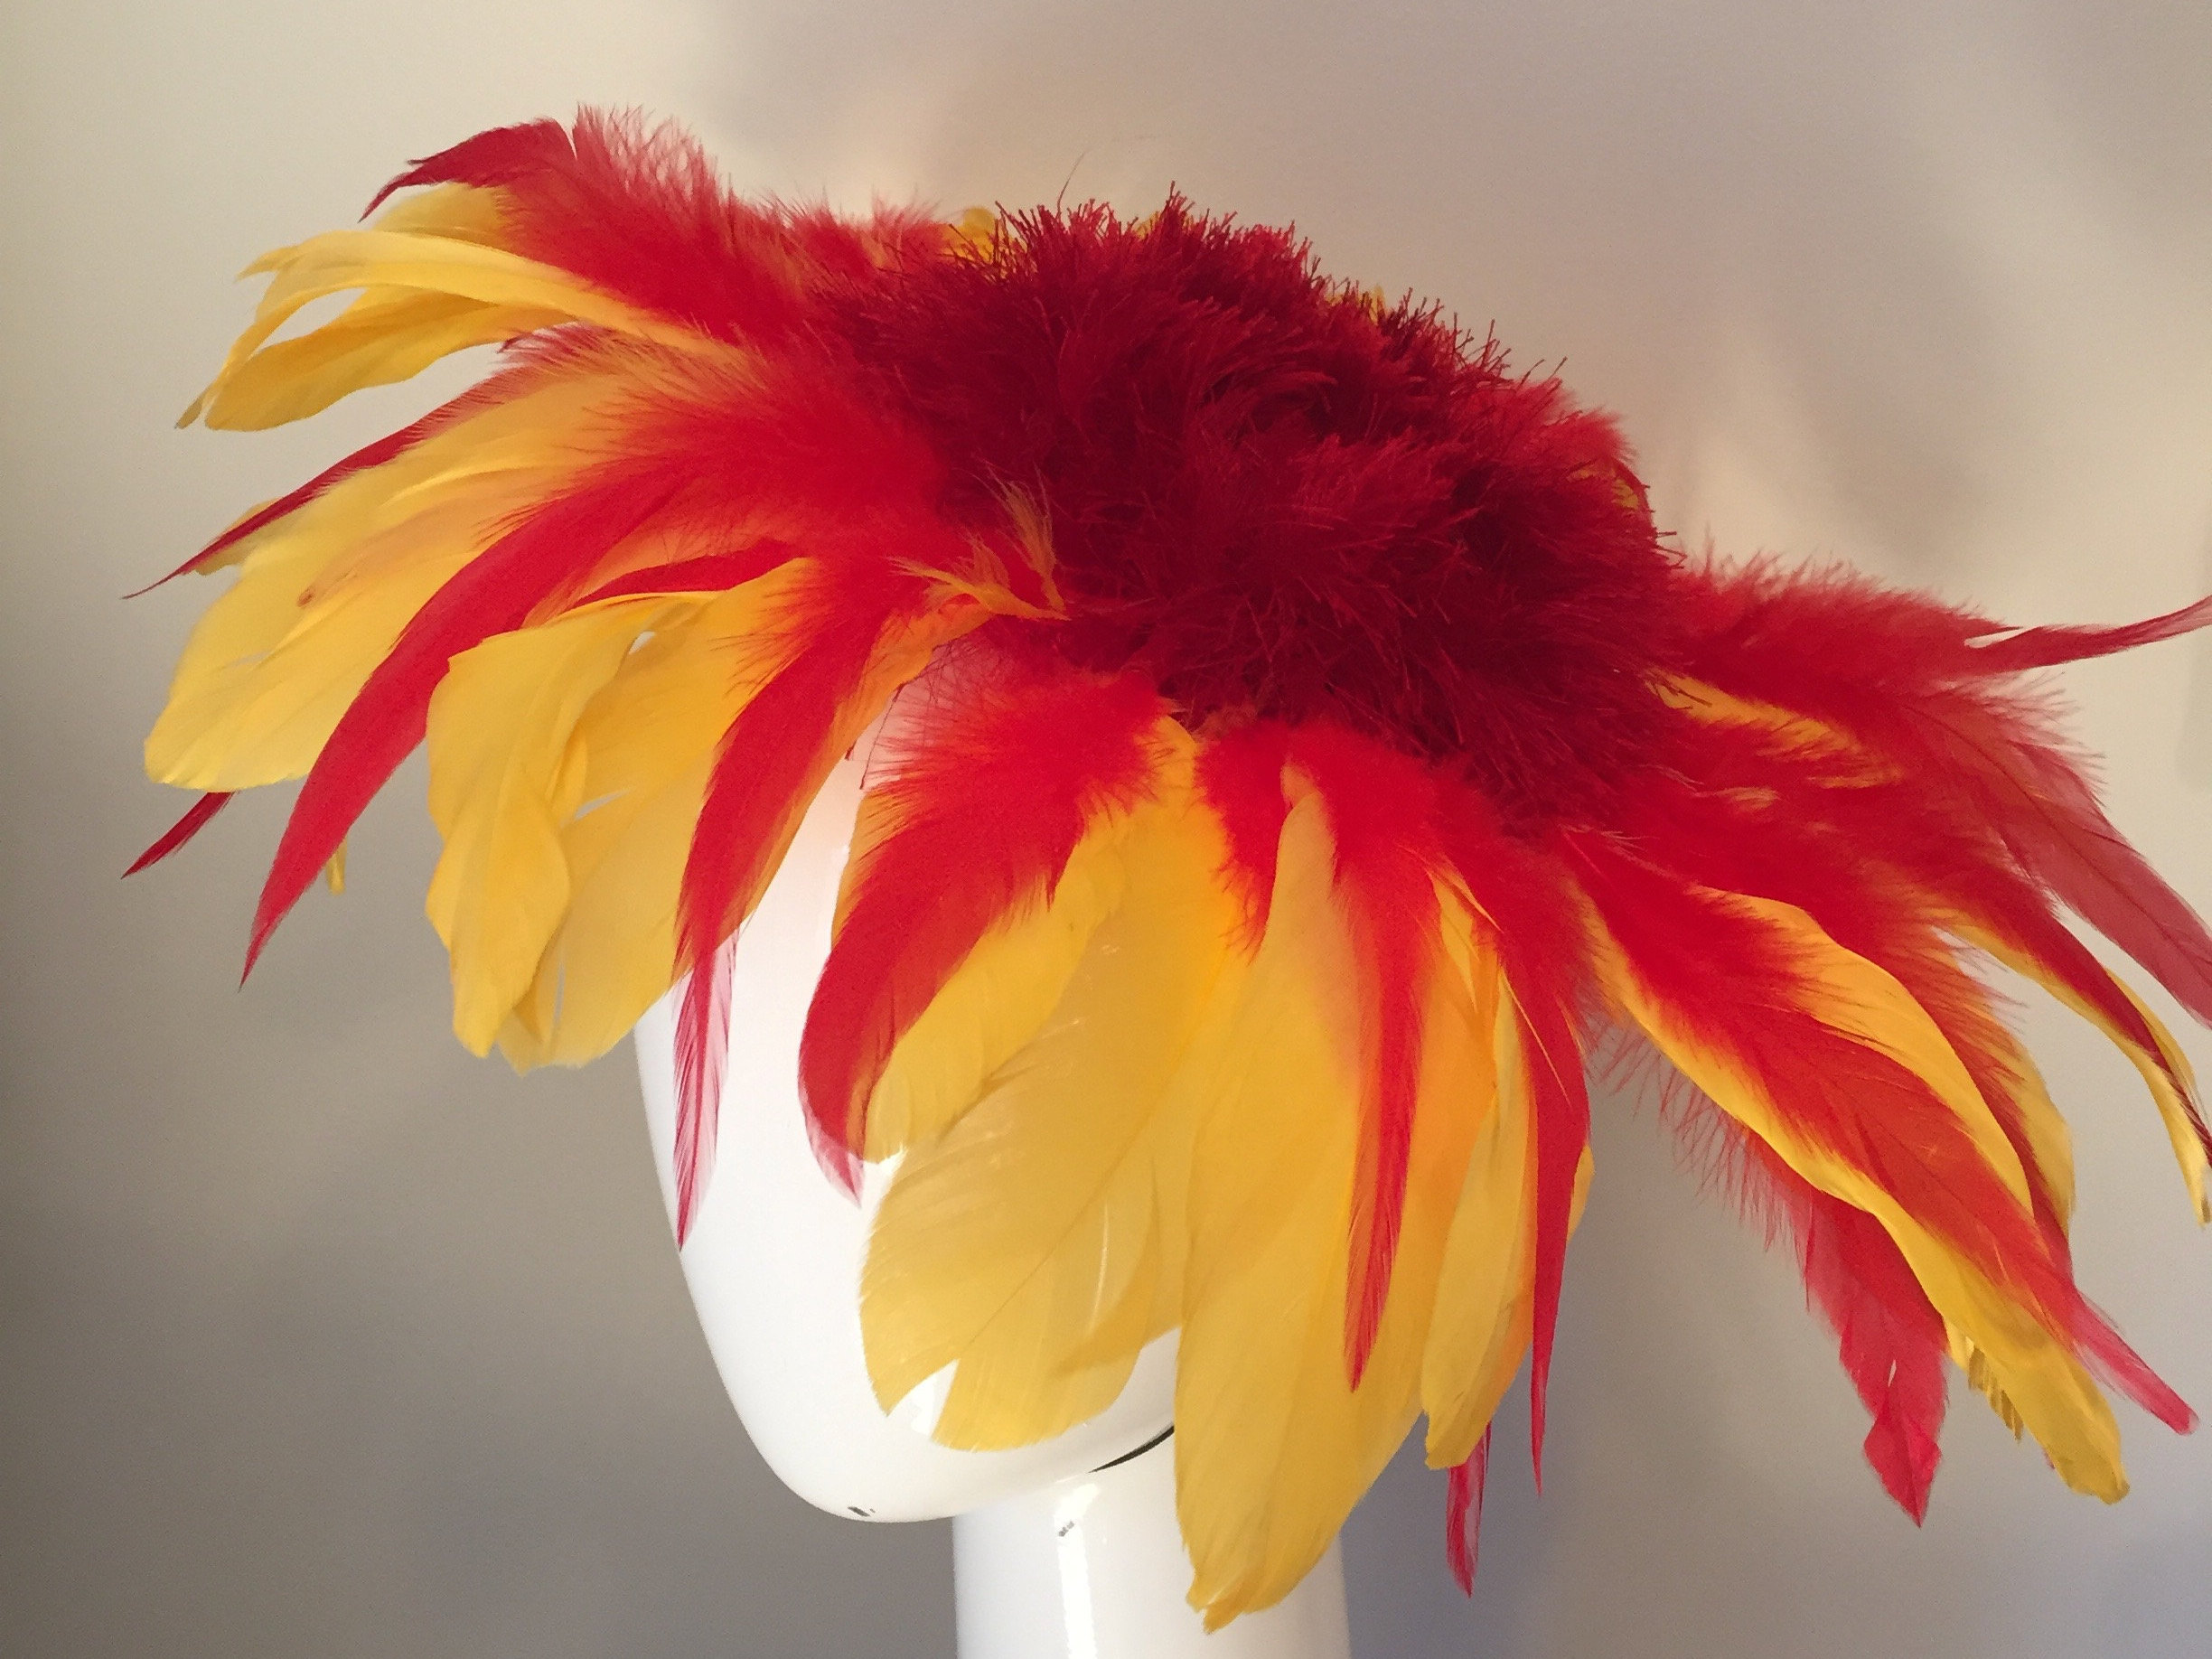 Red Yellow Flame Scarlett Feather Flower Ascot Derby Hat - Etsy